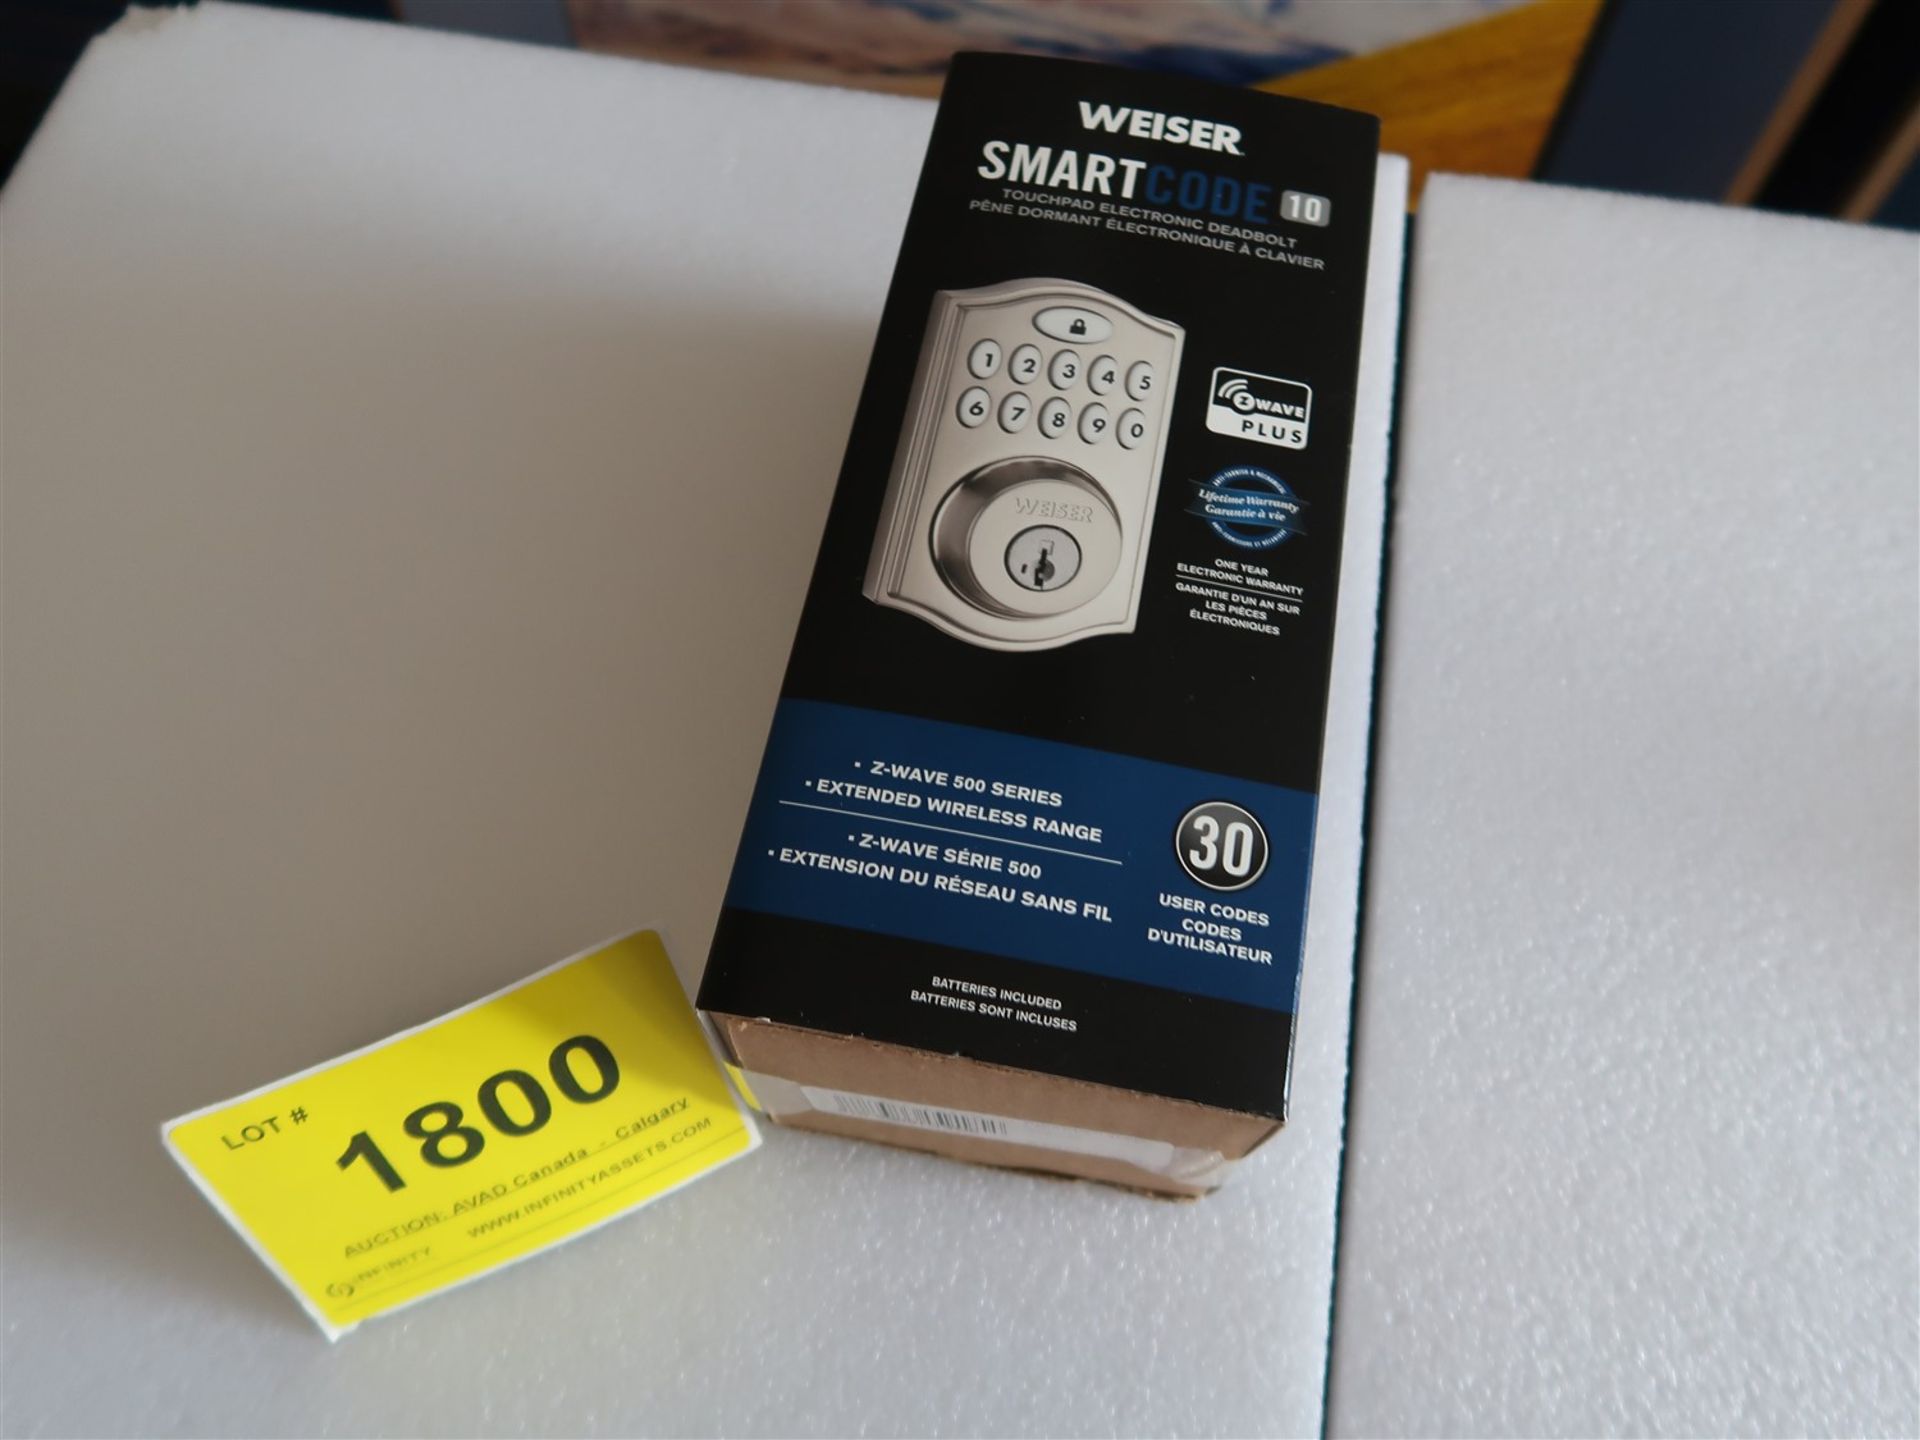 WEISER SMART CODE 10 TOUCH PAD ELECTRONIC DEAD BOLT SILVER FINISH 9GED 18000-016, (BNIB)